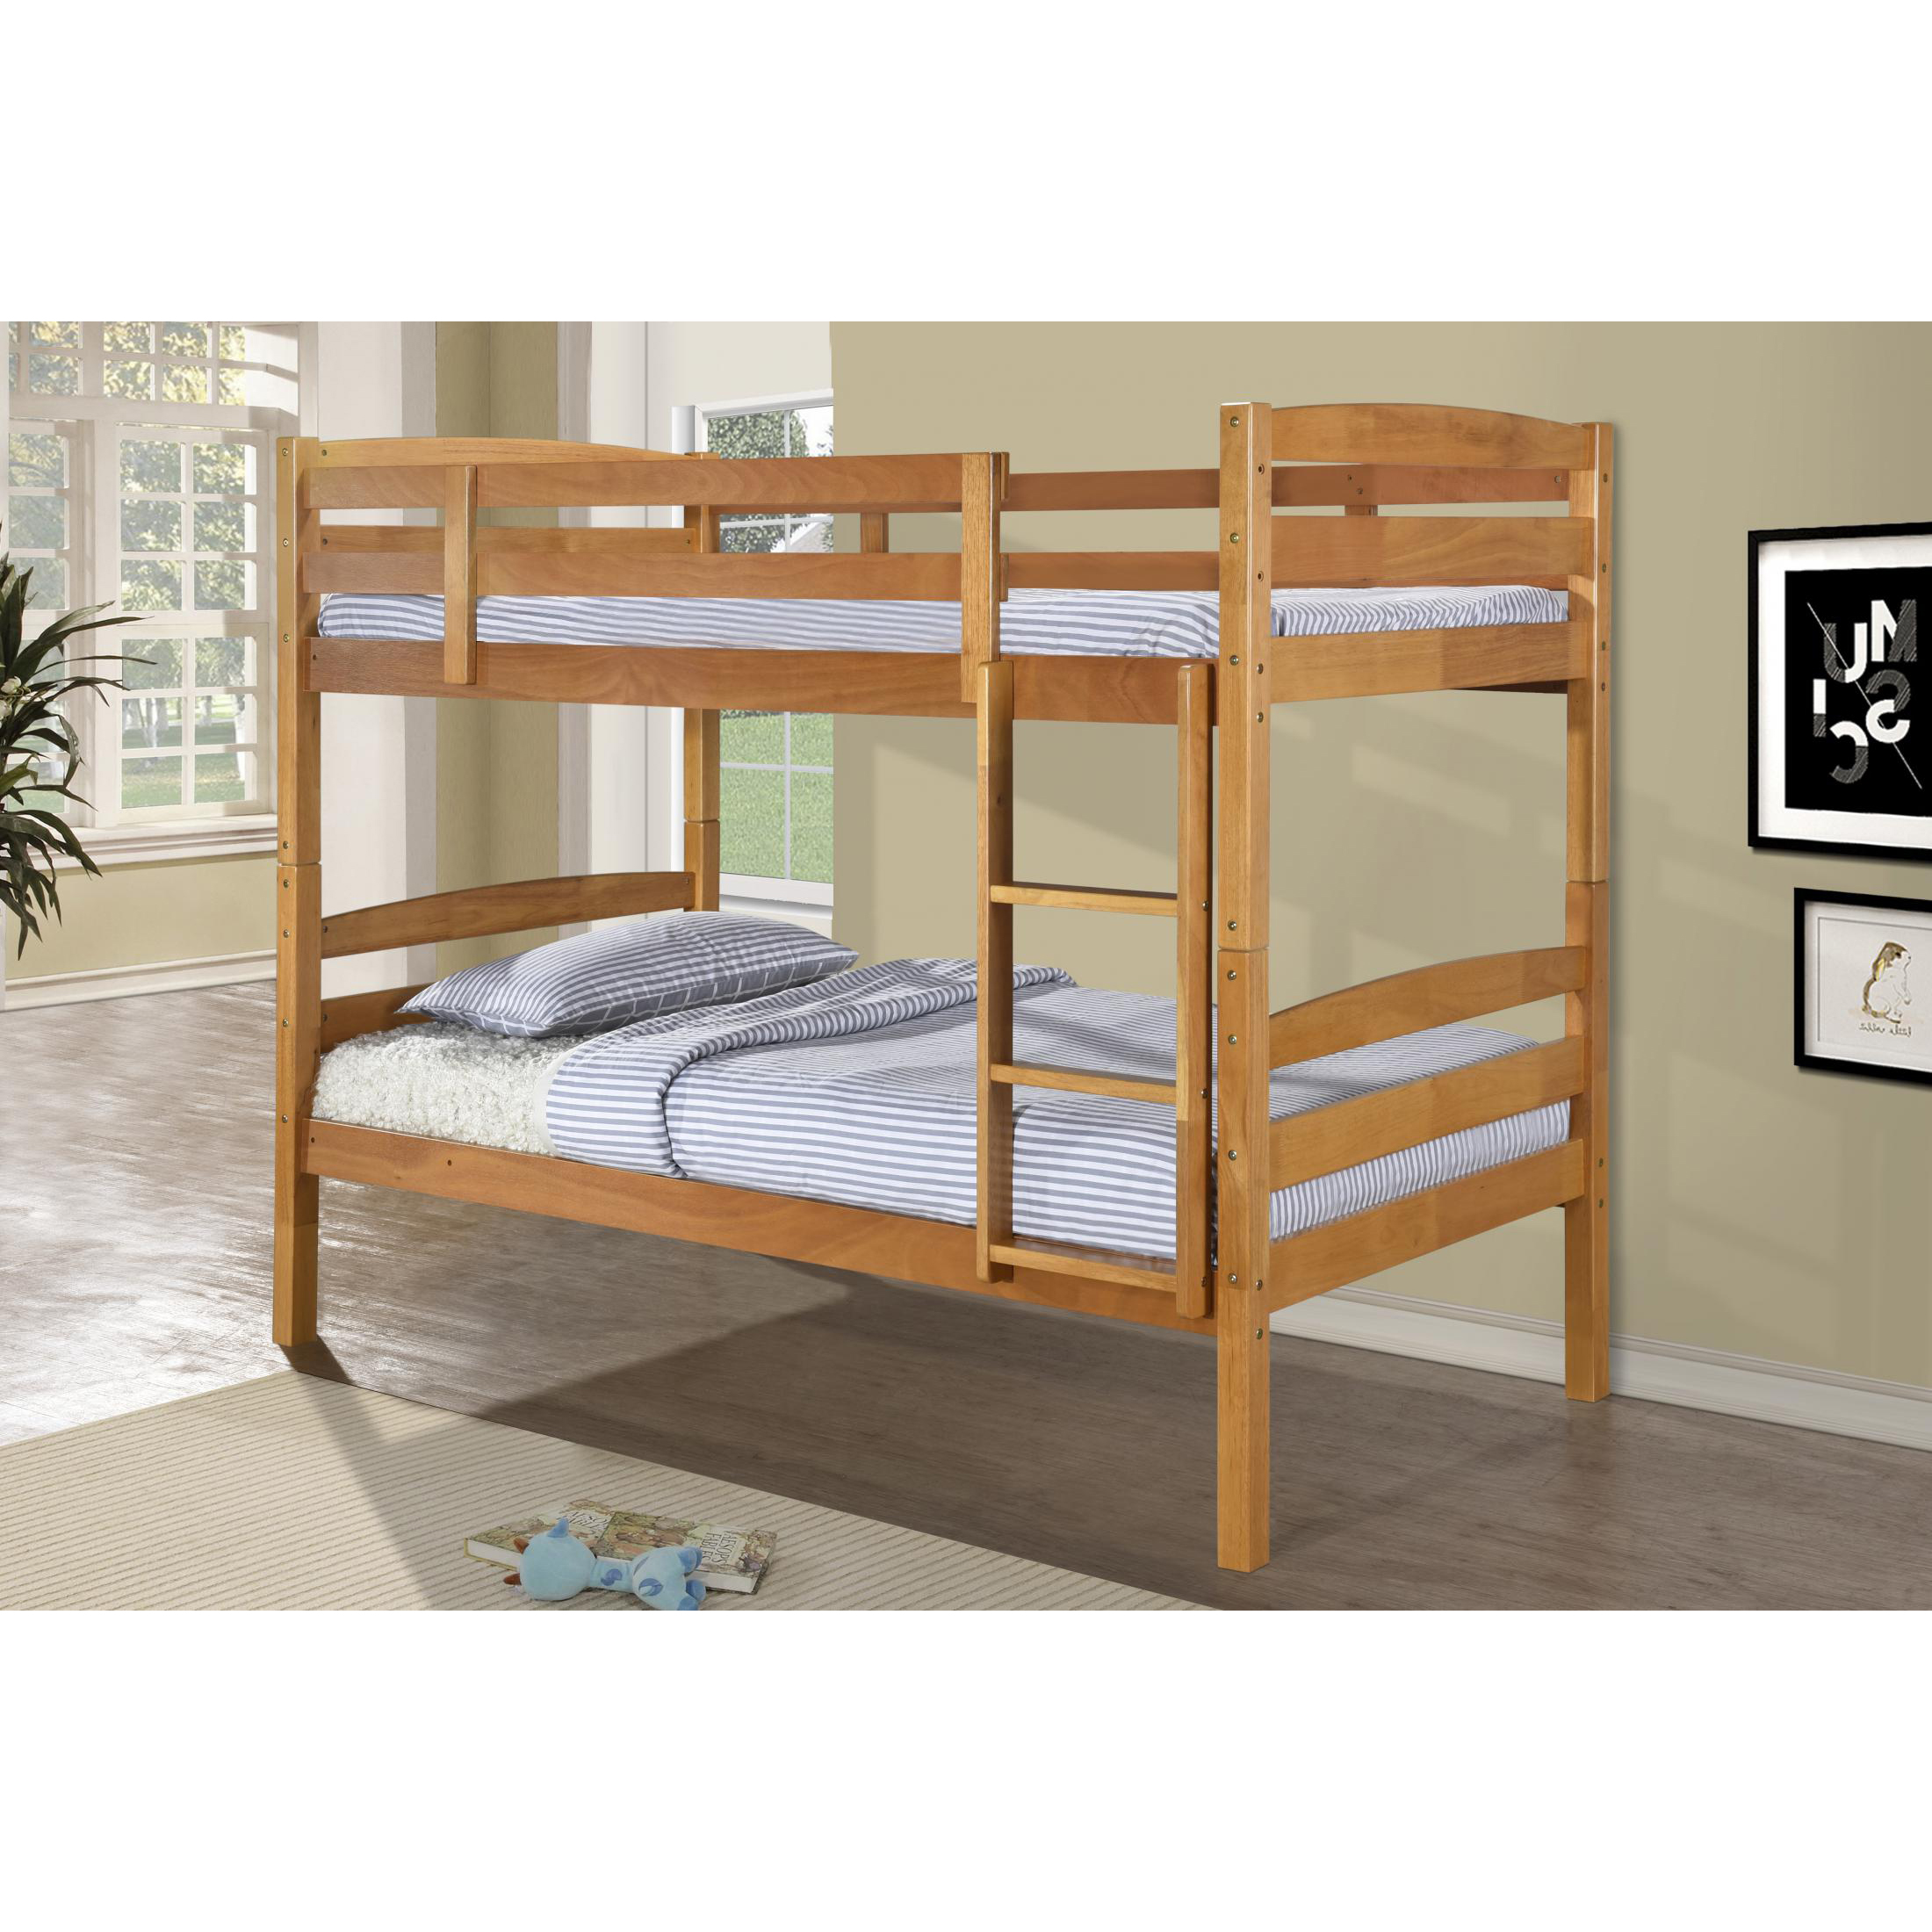 Tripoli Pine Wooden Bunk Bed